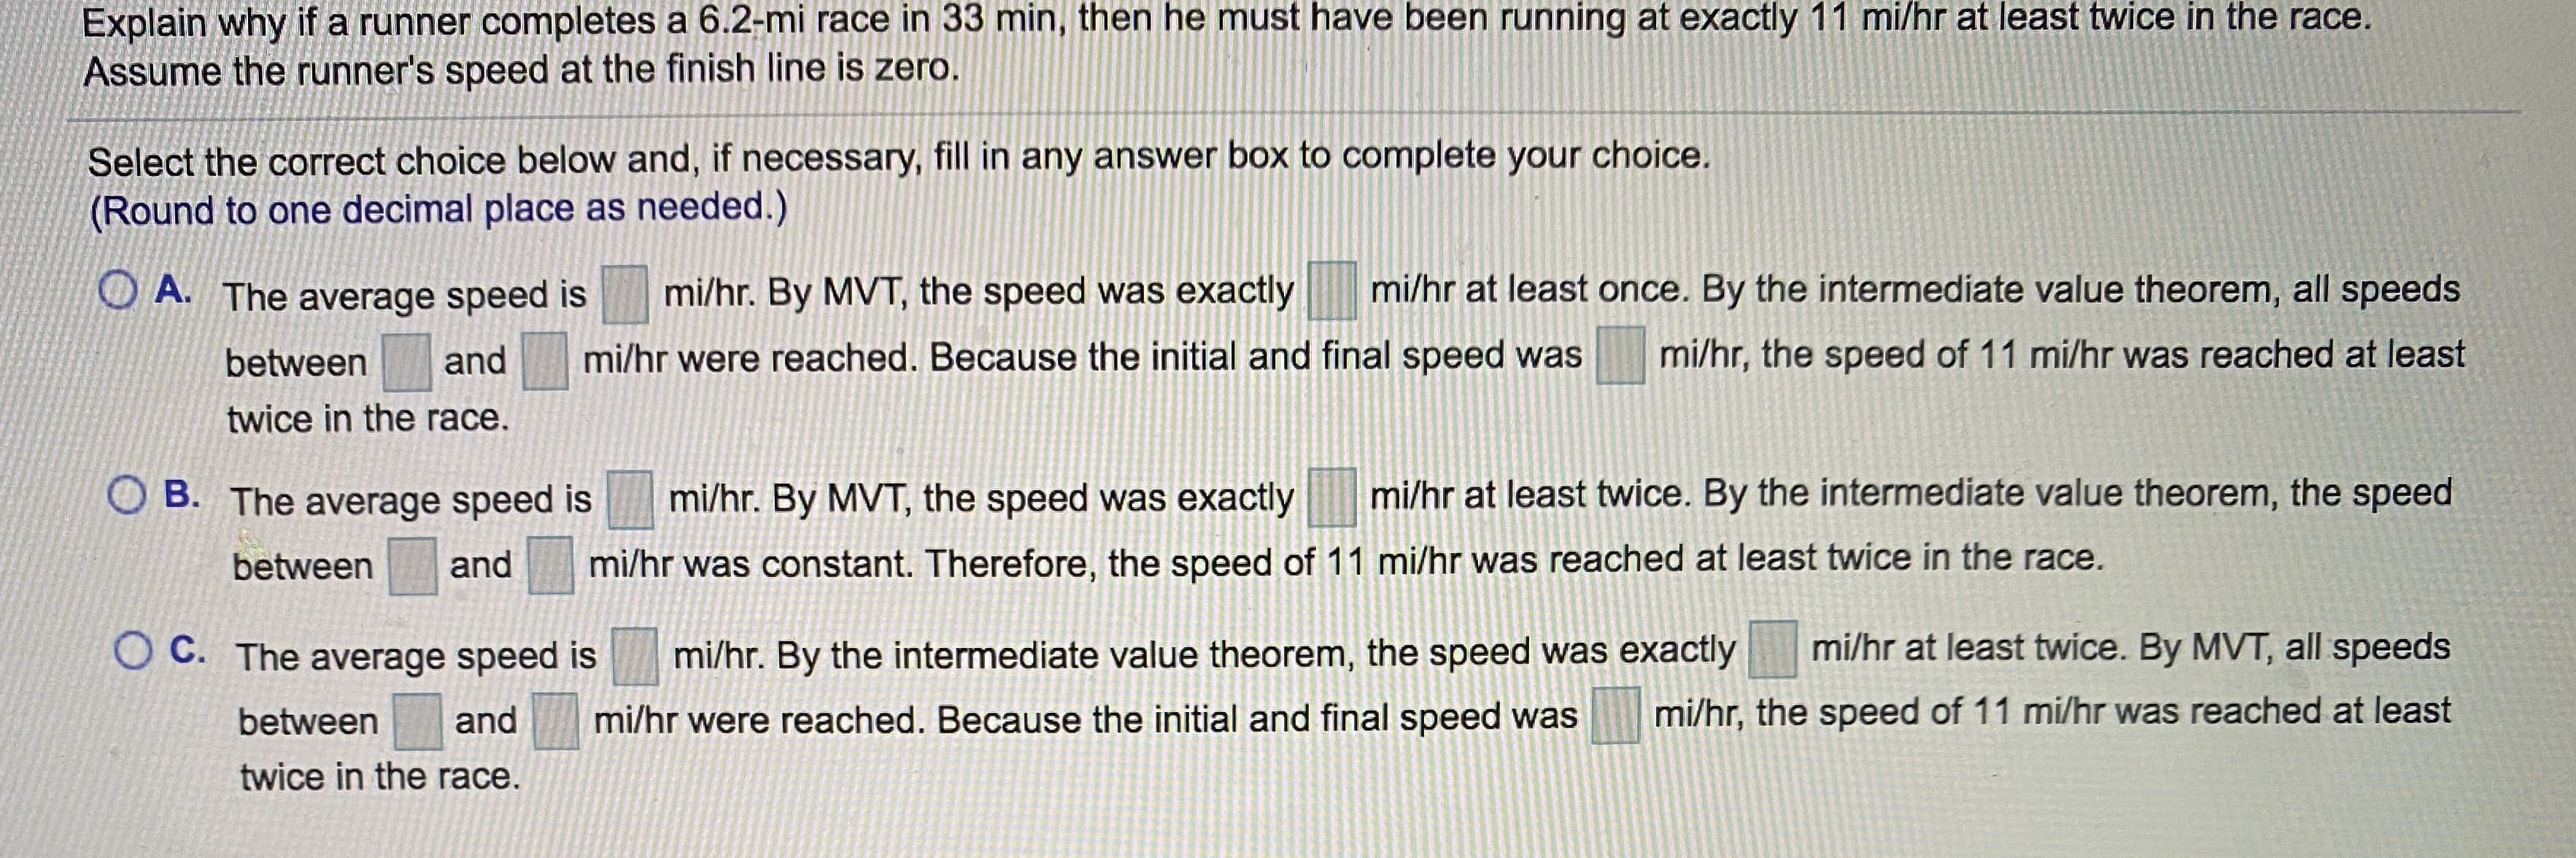 Explain why if a runner completes a 6.2-mi race in 33 min, then he must have been running at exactly 11 mi/hr at least twice in the race.
Assume the runner's speed at the finish line is zero.
Select the correct choice below and, if necessary, fill in any answer box to complete your choice.
(Round to one decimal place as needed.)
O A. The average speed is
mi/hr. By MVT, the speed was exactly
mi/hr at least once. By the intermediate value theorem, all speeds
between
and
mi/hr were reached. Because the initial and final speed was
mi/hr, the speed of 11 mi/hr was reached at least
twice in the race.
B. The average speed is
mi/hr. By MVT, the speed was exactly
mi/hr at least twice. By the intermediate value theorem, the speed
between
and
mi/hr was constant. Therefore, the speed of 11 mi/hr was reached at least twice in the race.
O C. The average speed is
mi/hr. By the intermediate value theorem, the speed was exactly
mi/hr at least twice. By MVT, all speeds
between
and
mi/hr were reached. Because the initial and final speed was
mi/hr, the speed of 11 mi/hr was reached at least
twice in the race.
